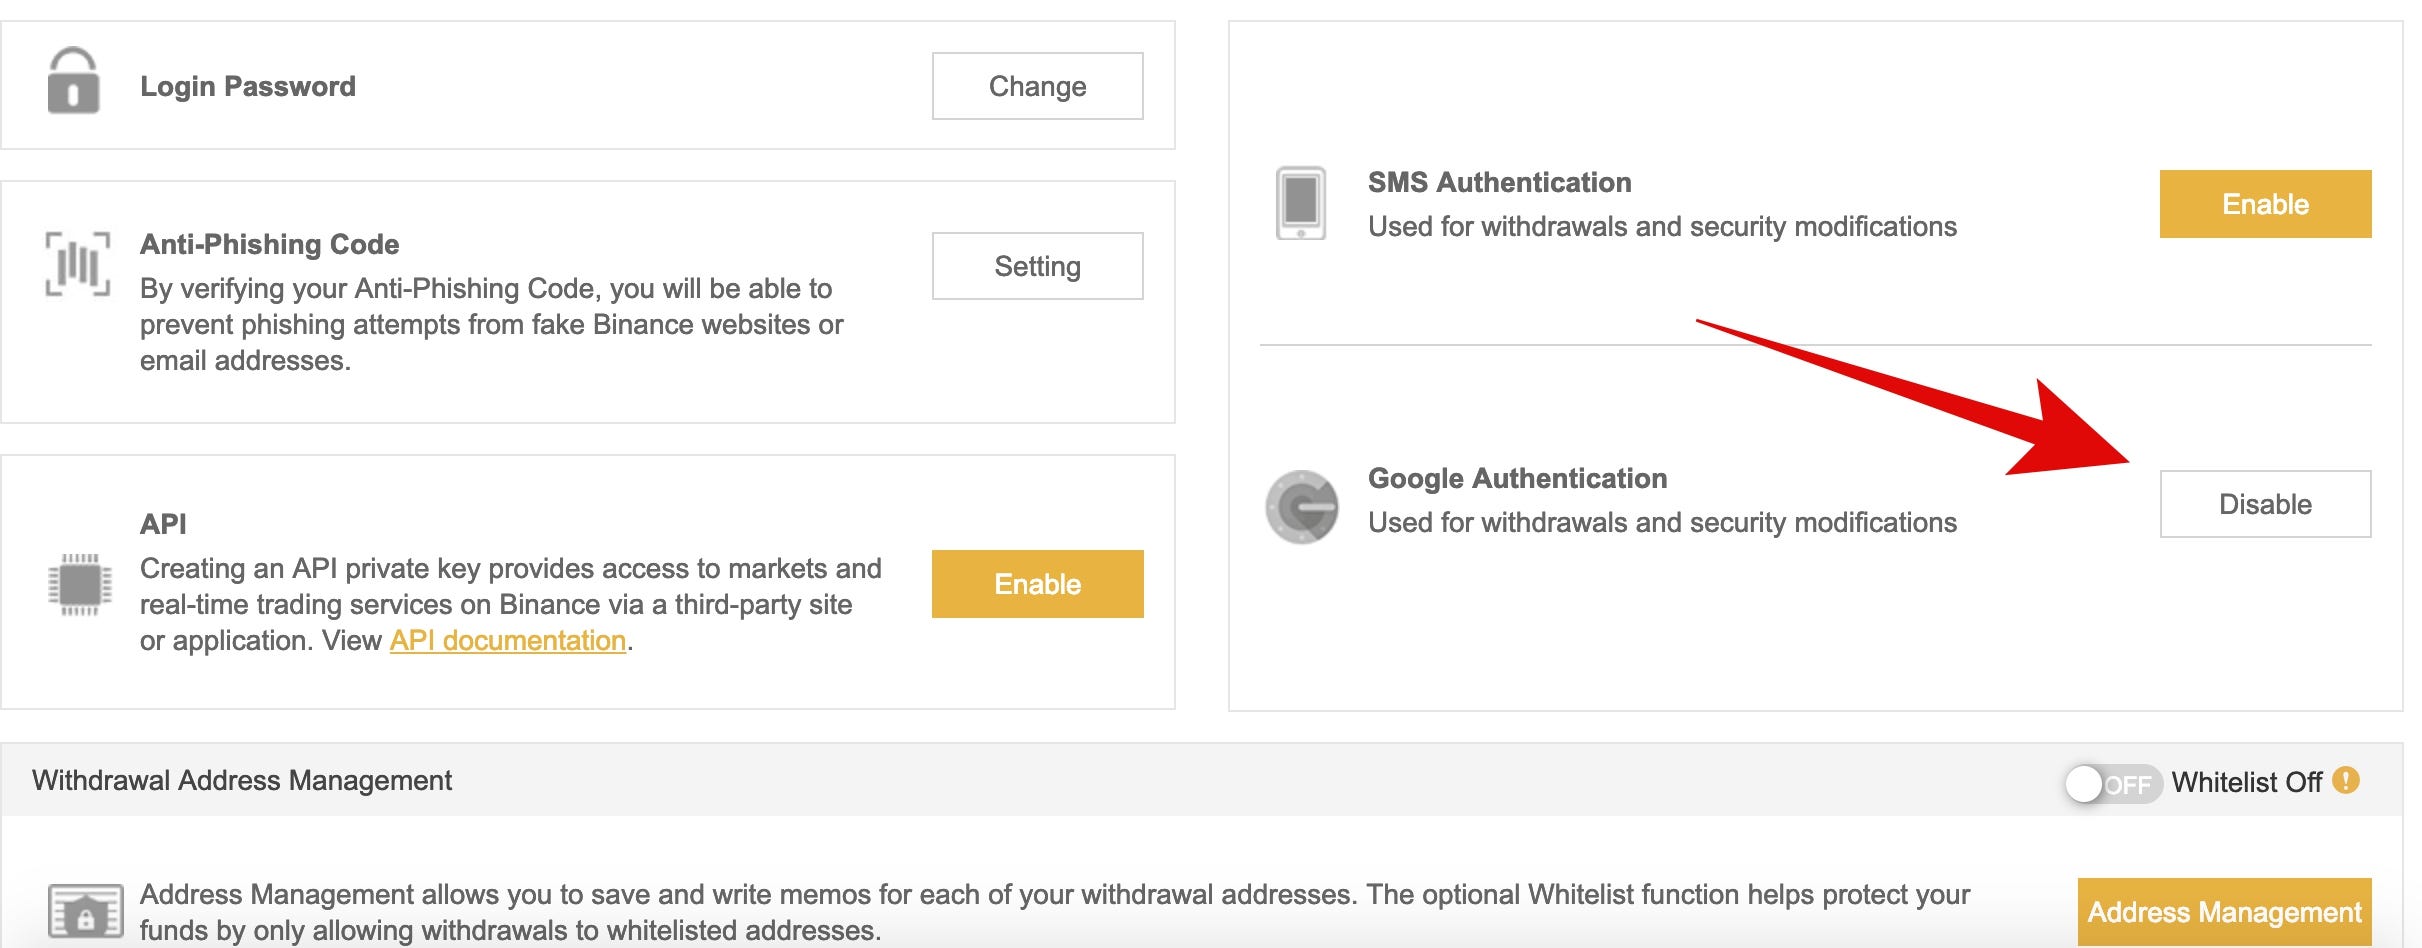 Setting up Google Authenticator on Multiple Devices